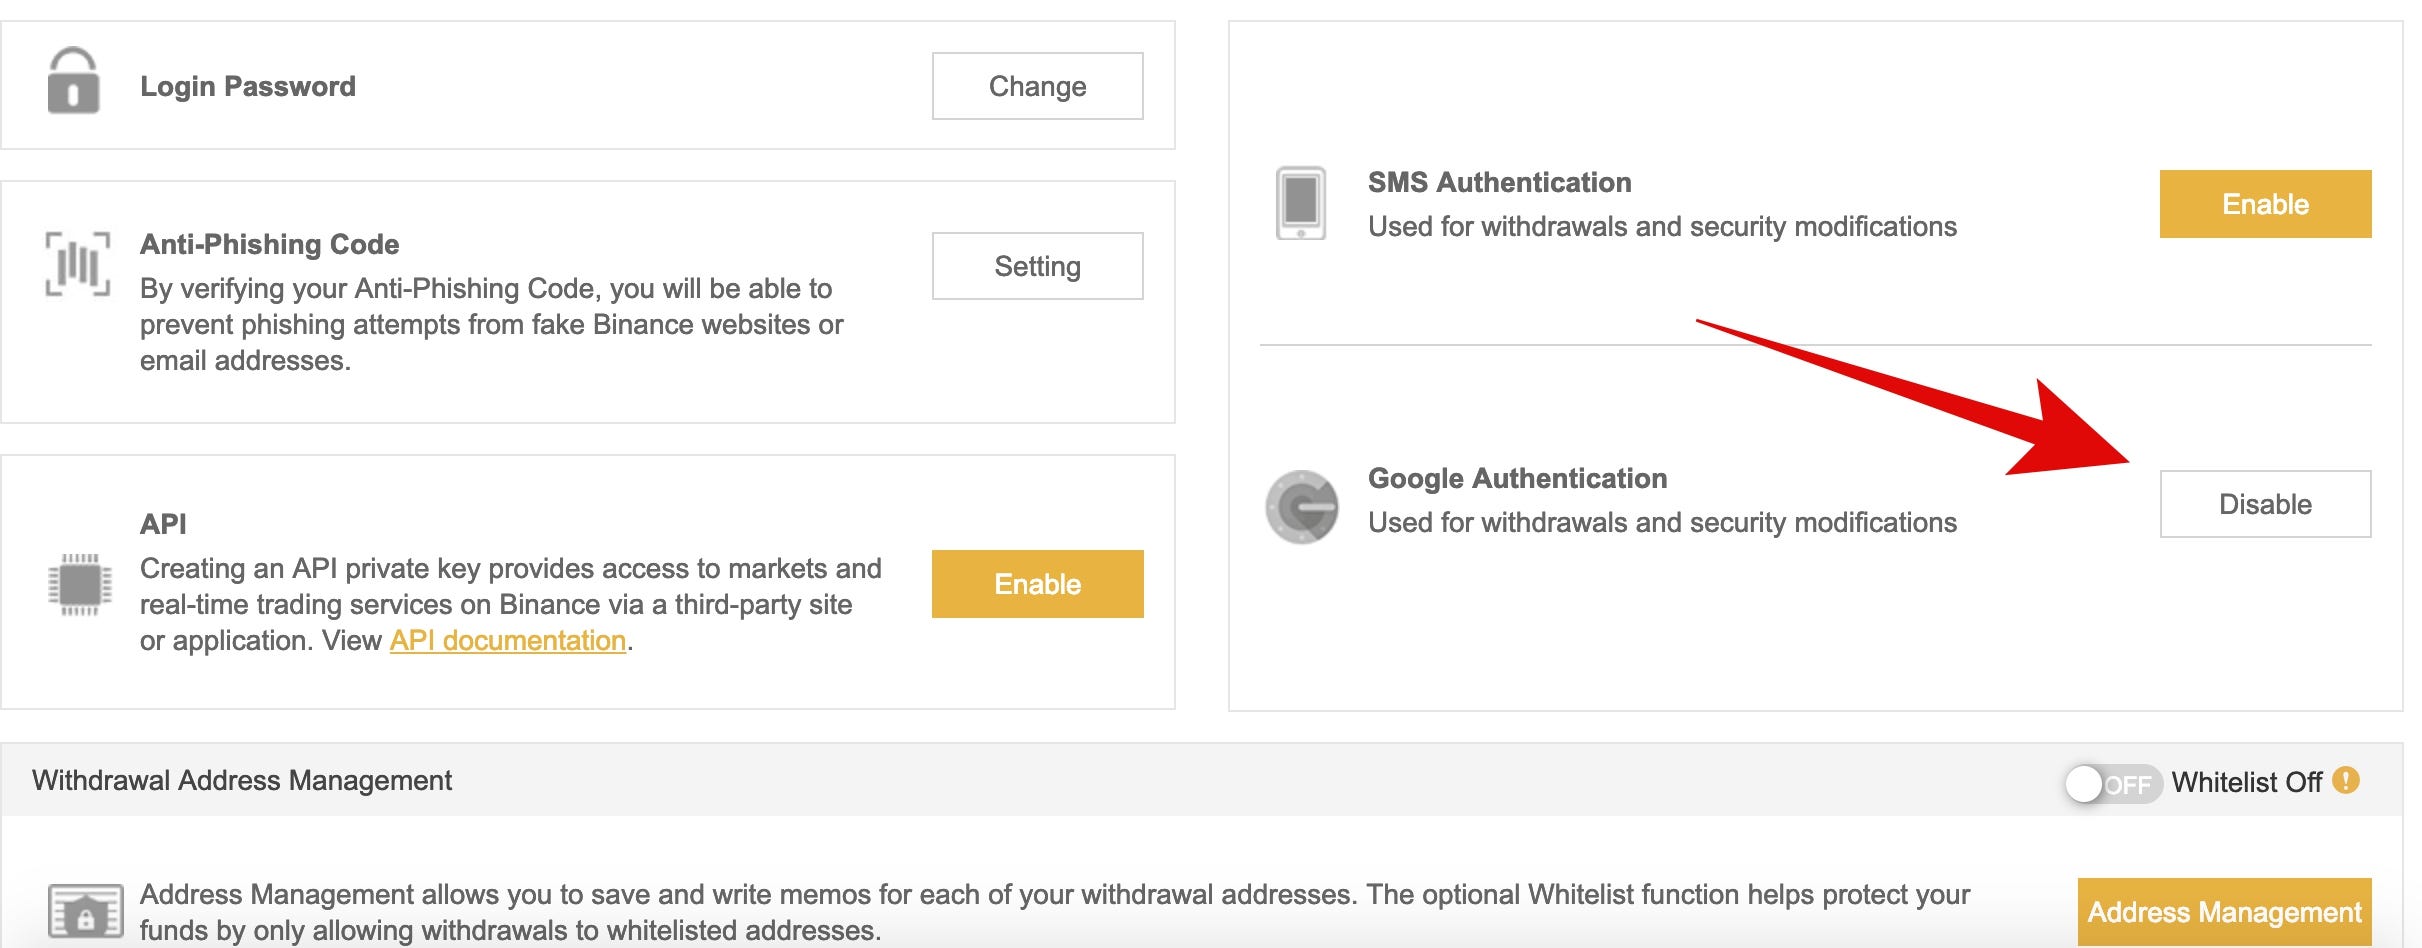 Setting up Google Authenticator on Multiple Devices